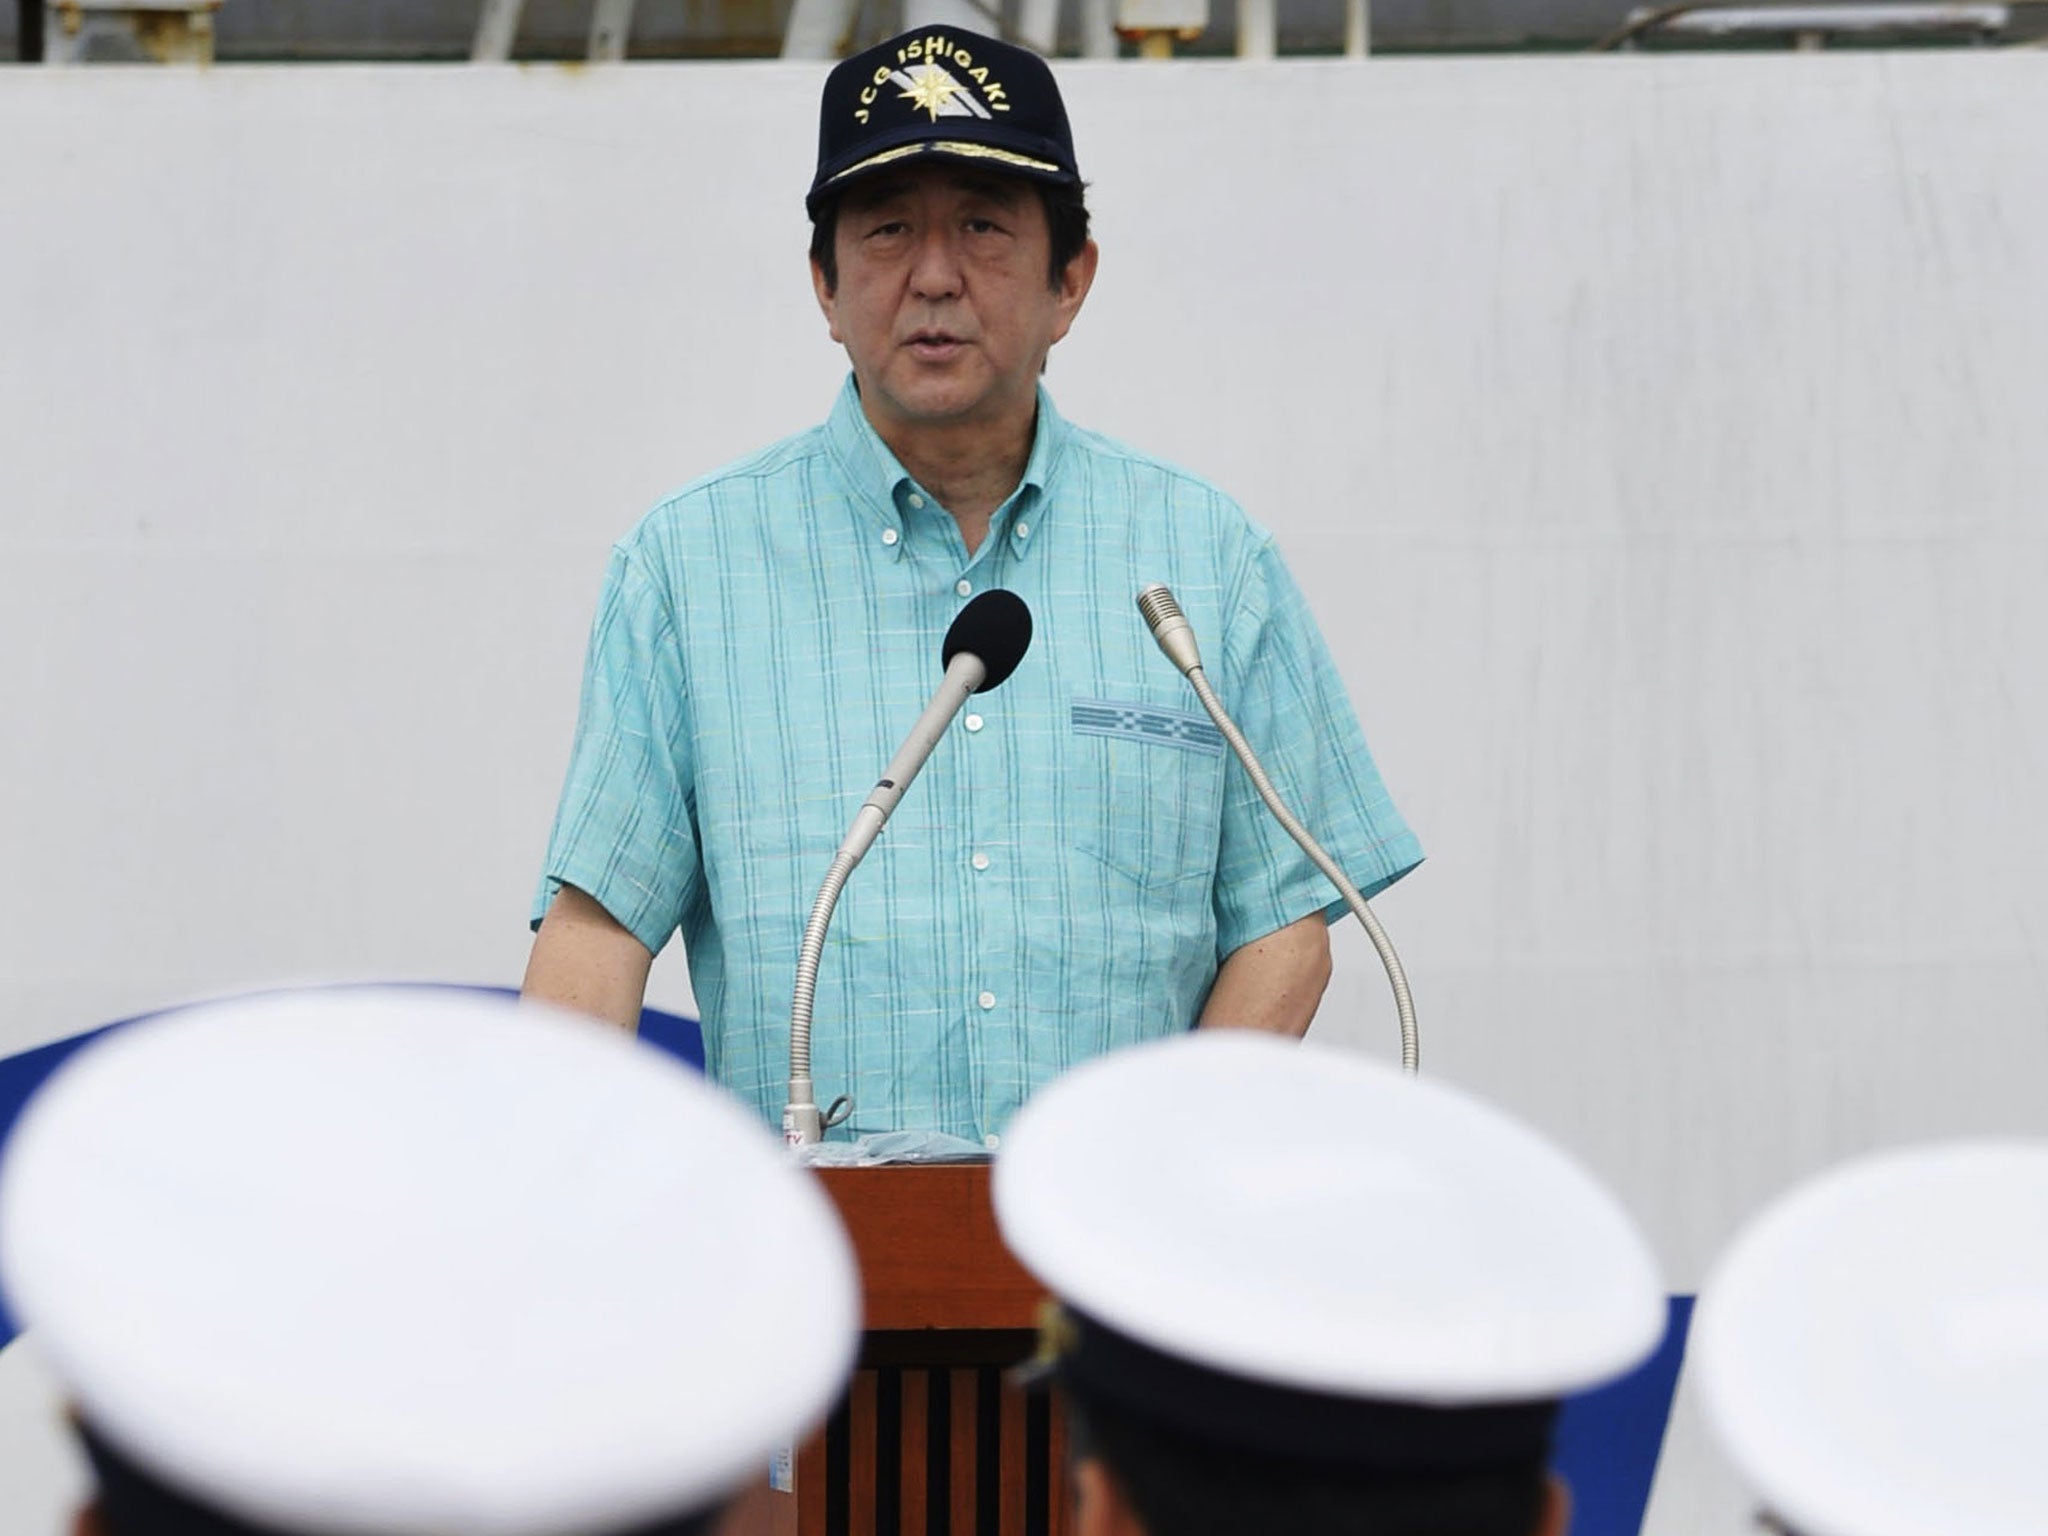 Japan’s Prime Minister Shinzo Abe delivers his speech before officers of Japan Coast Guard